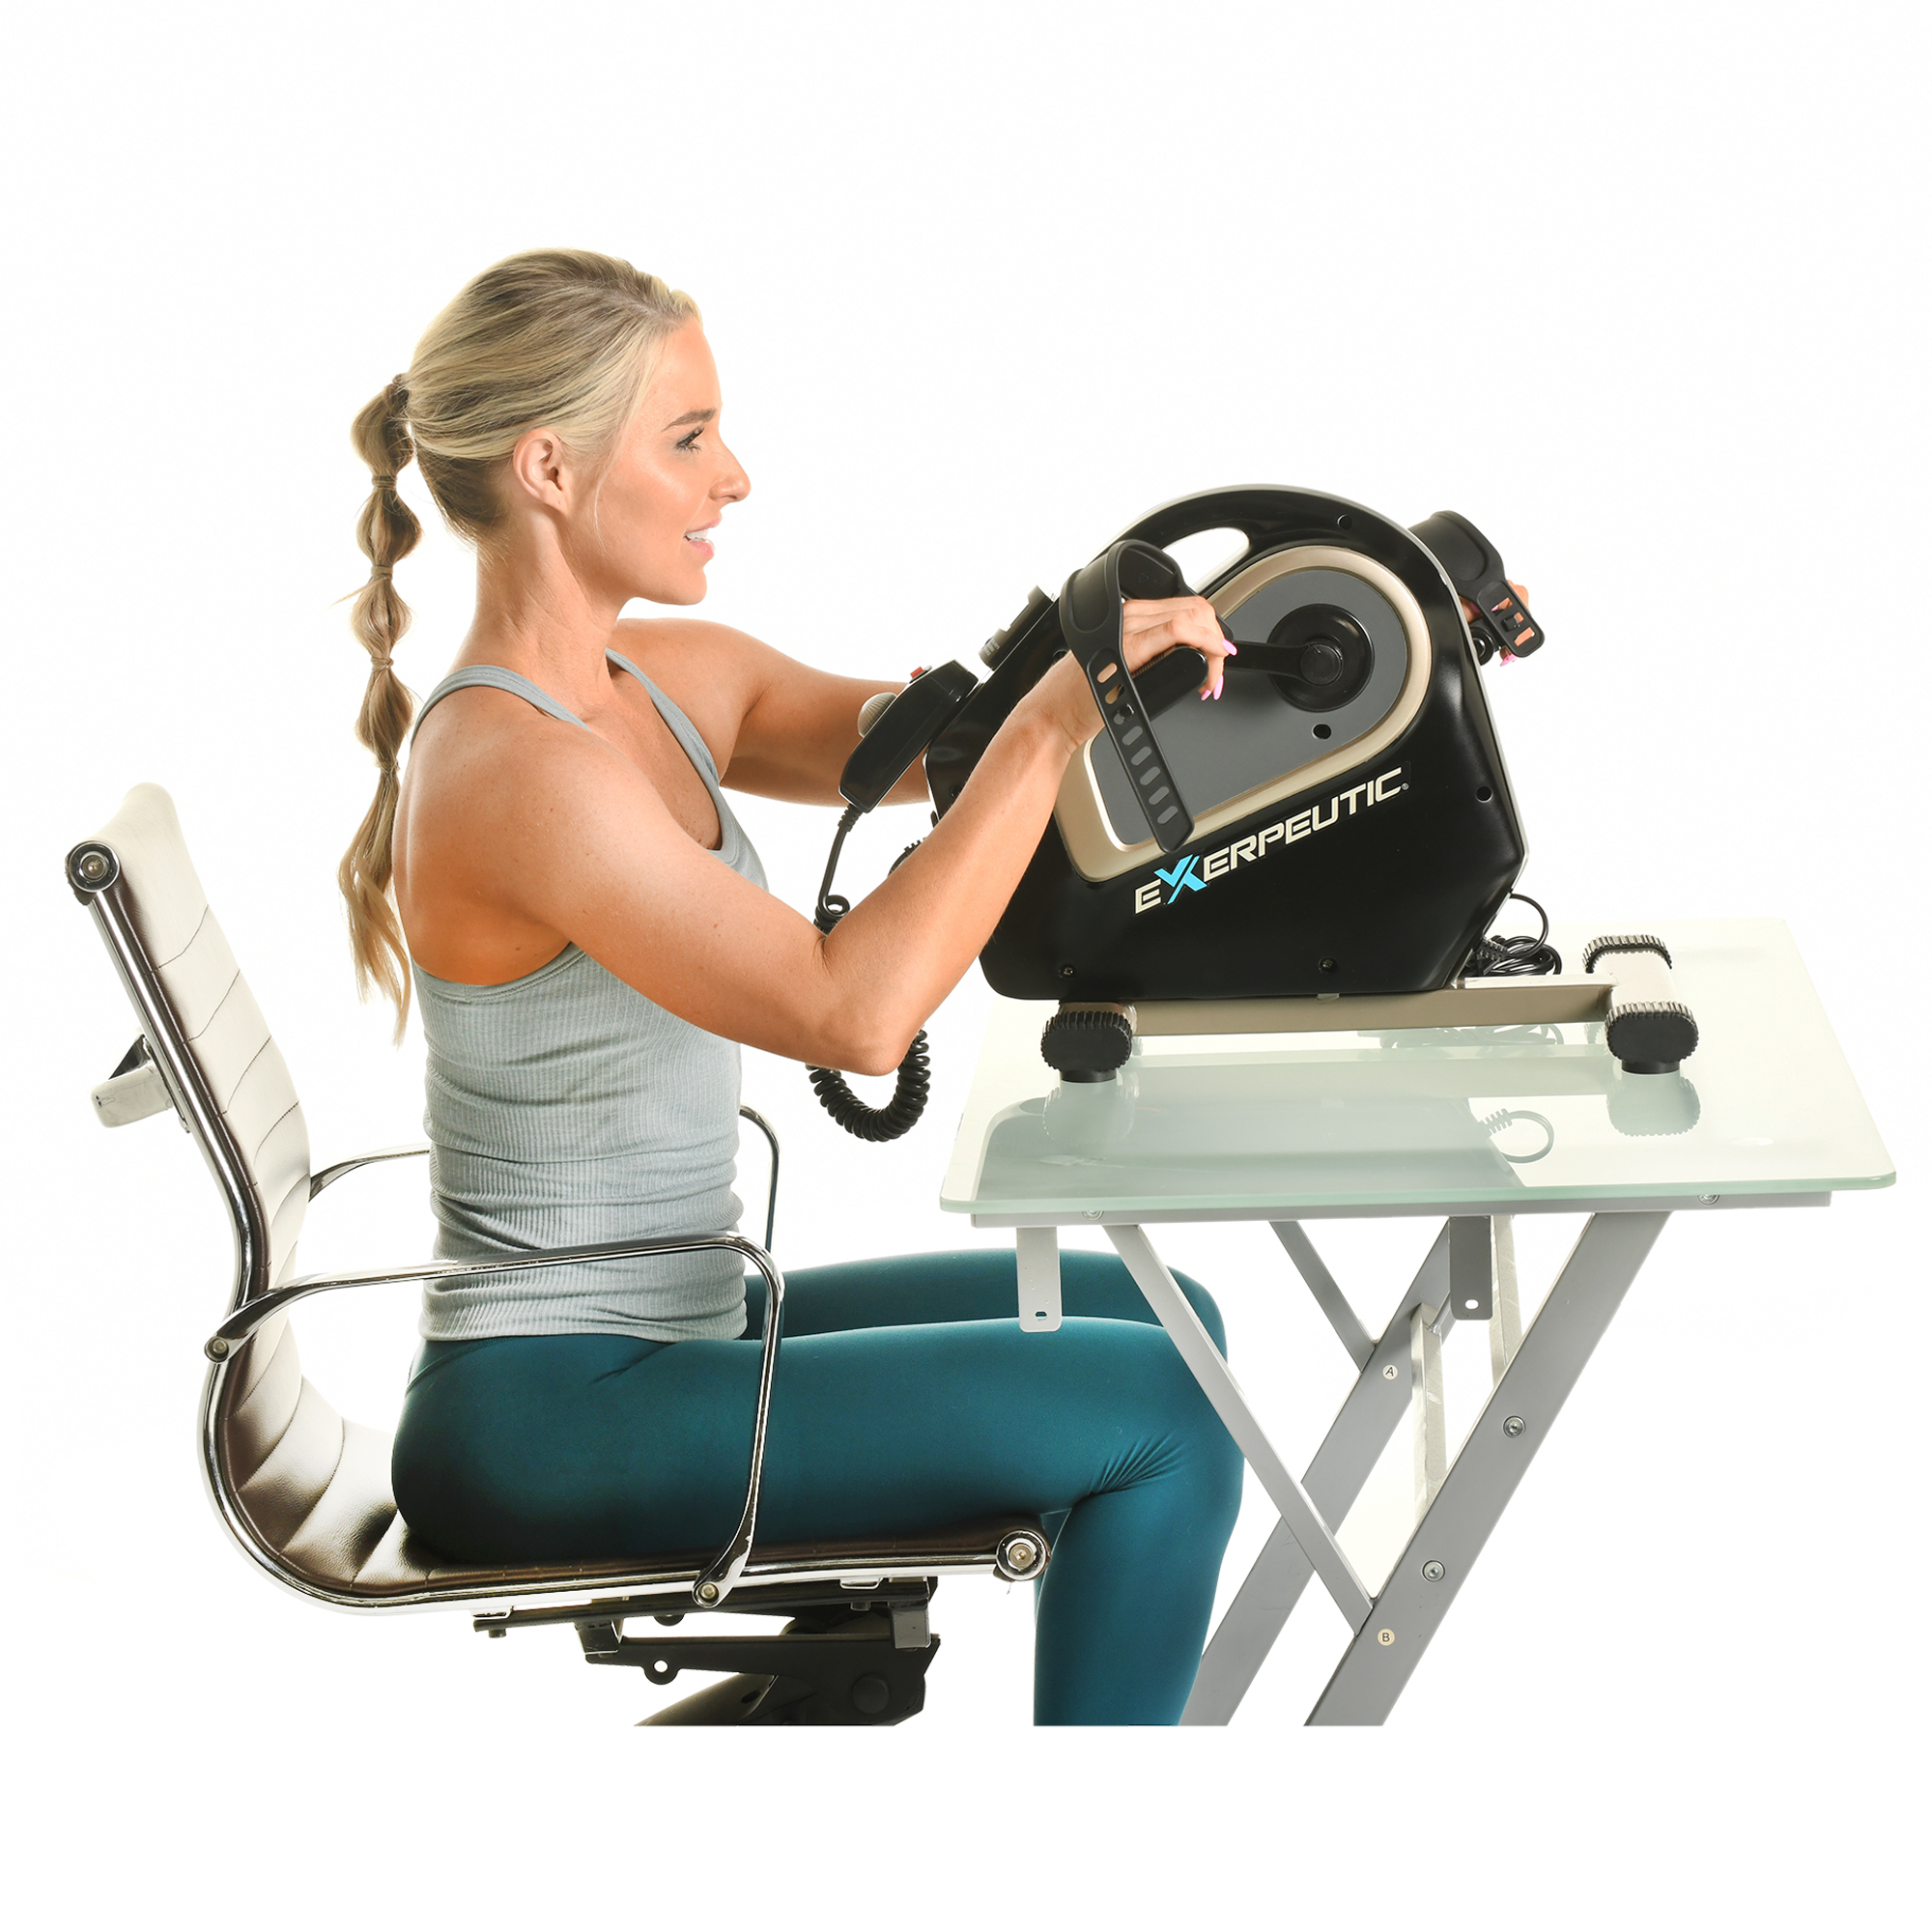 Exerpeutic 2000M Motorized Electric Legs and Arms Pedal Exerciser Exercise Bike - image 4 of 7